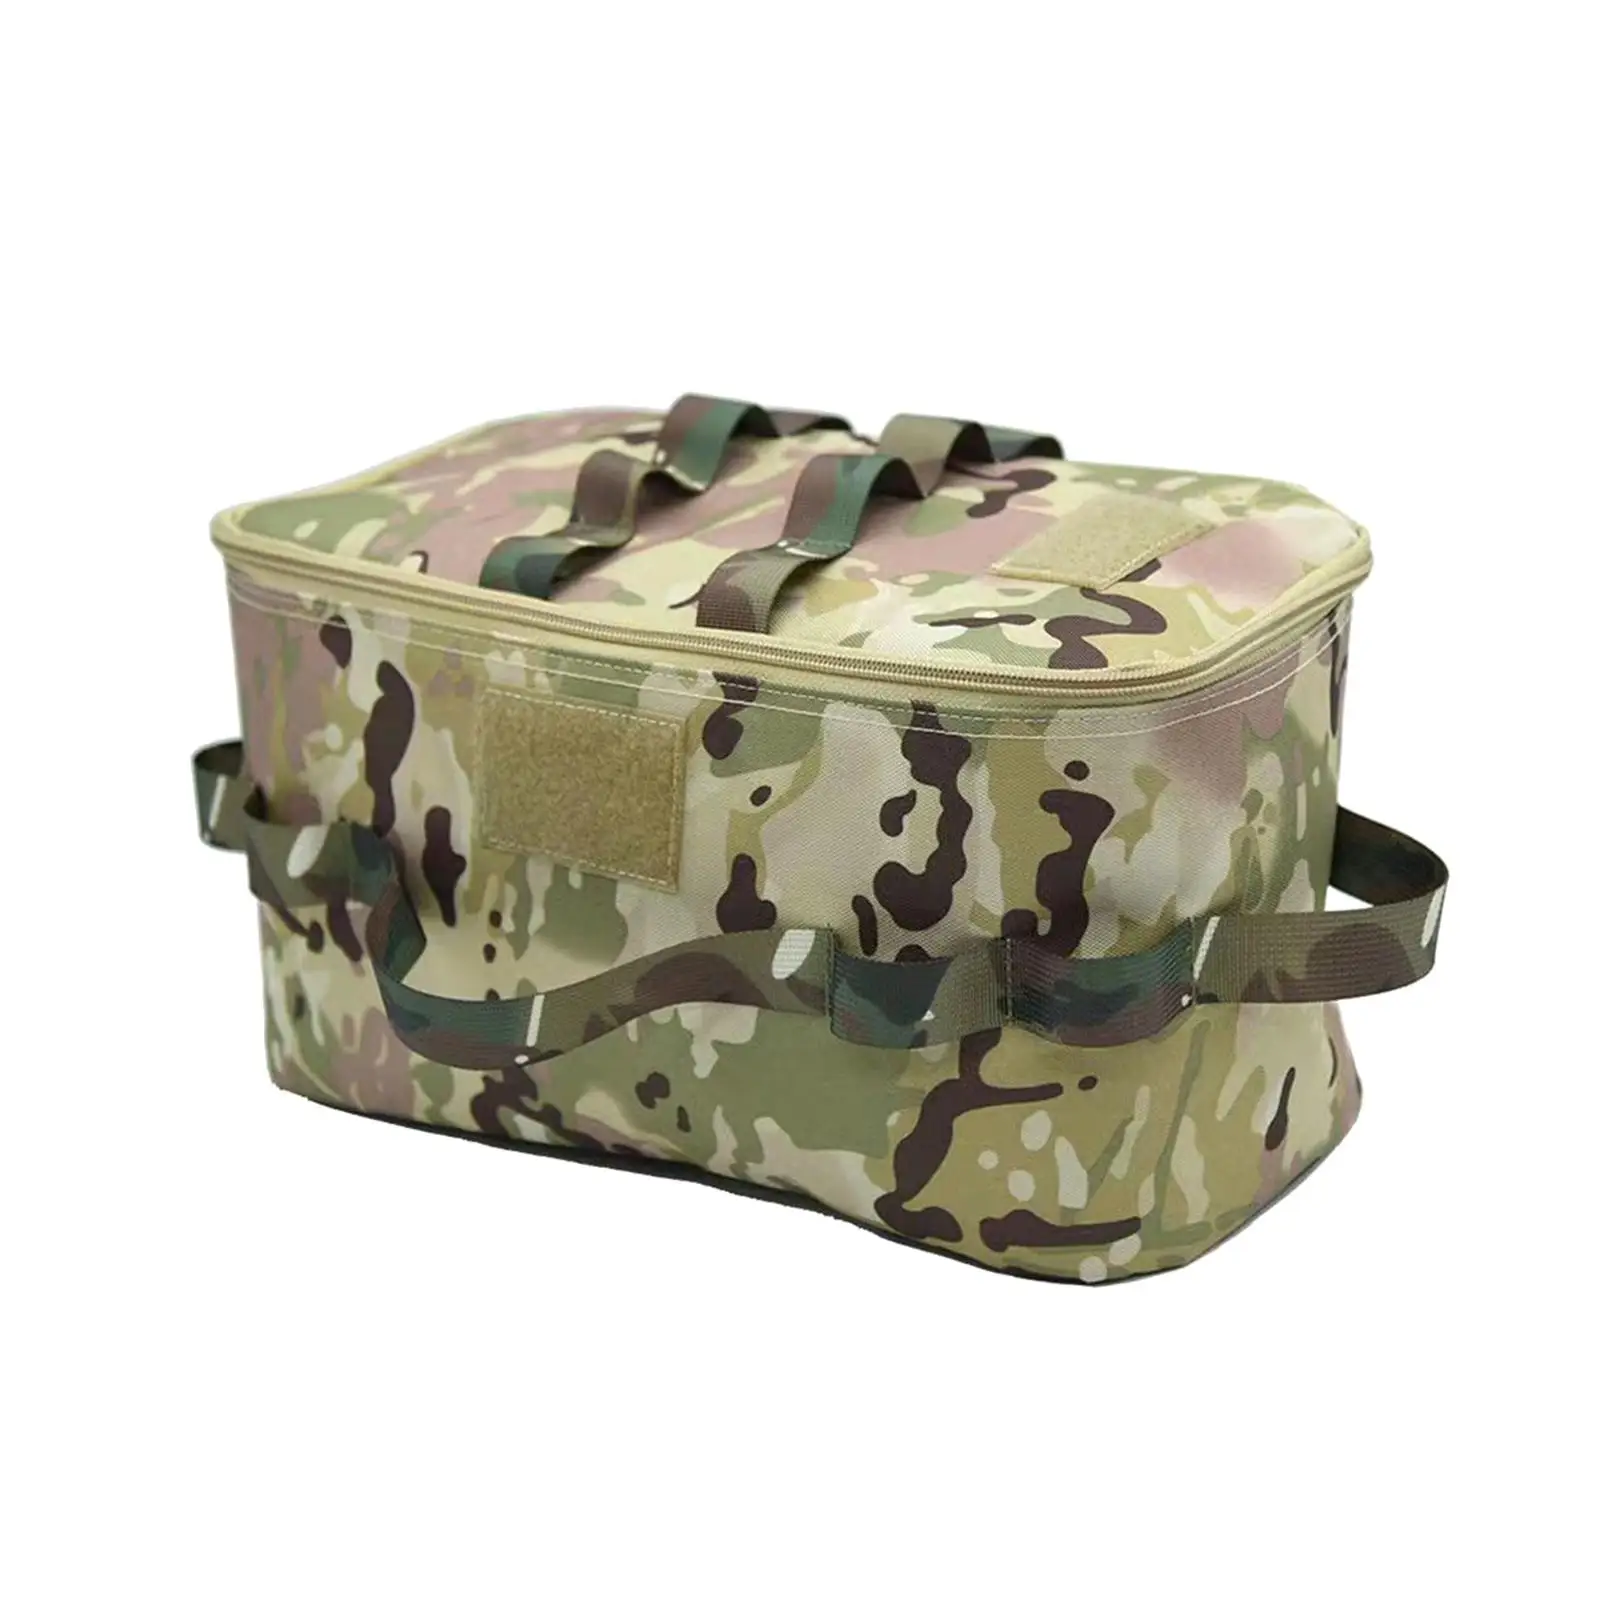 Durable Camping Storage Bag with Handles Cookware Carrying Case Portable Multipurpose for Hiking